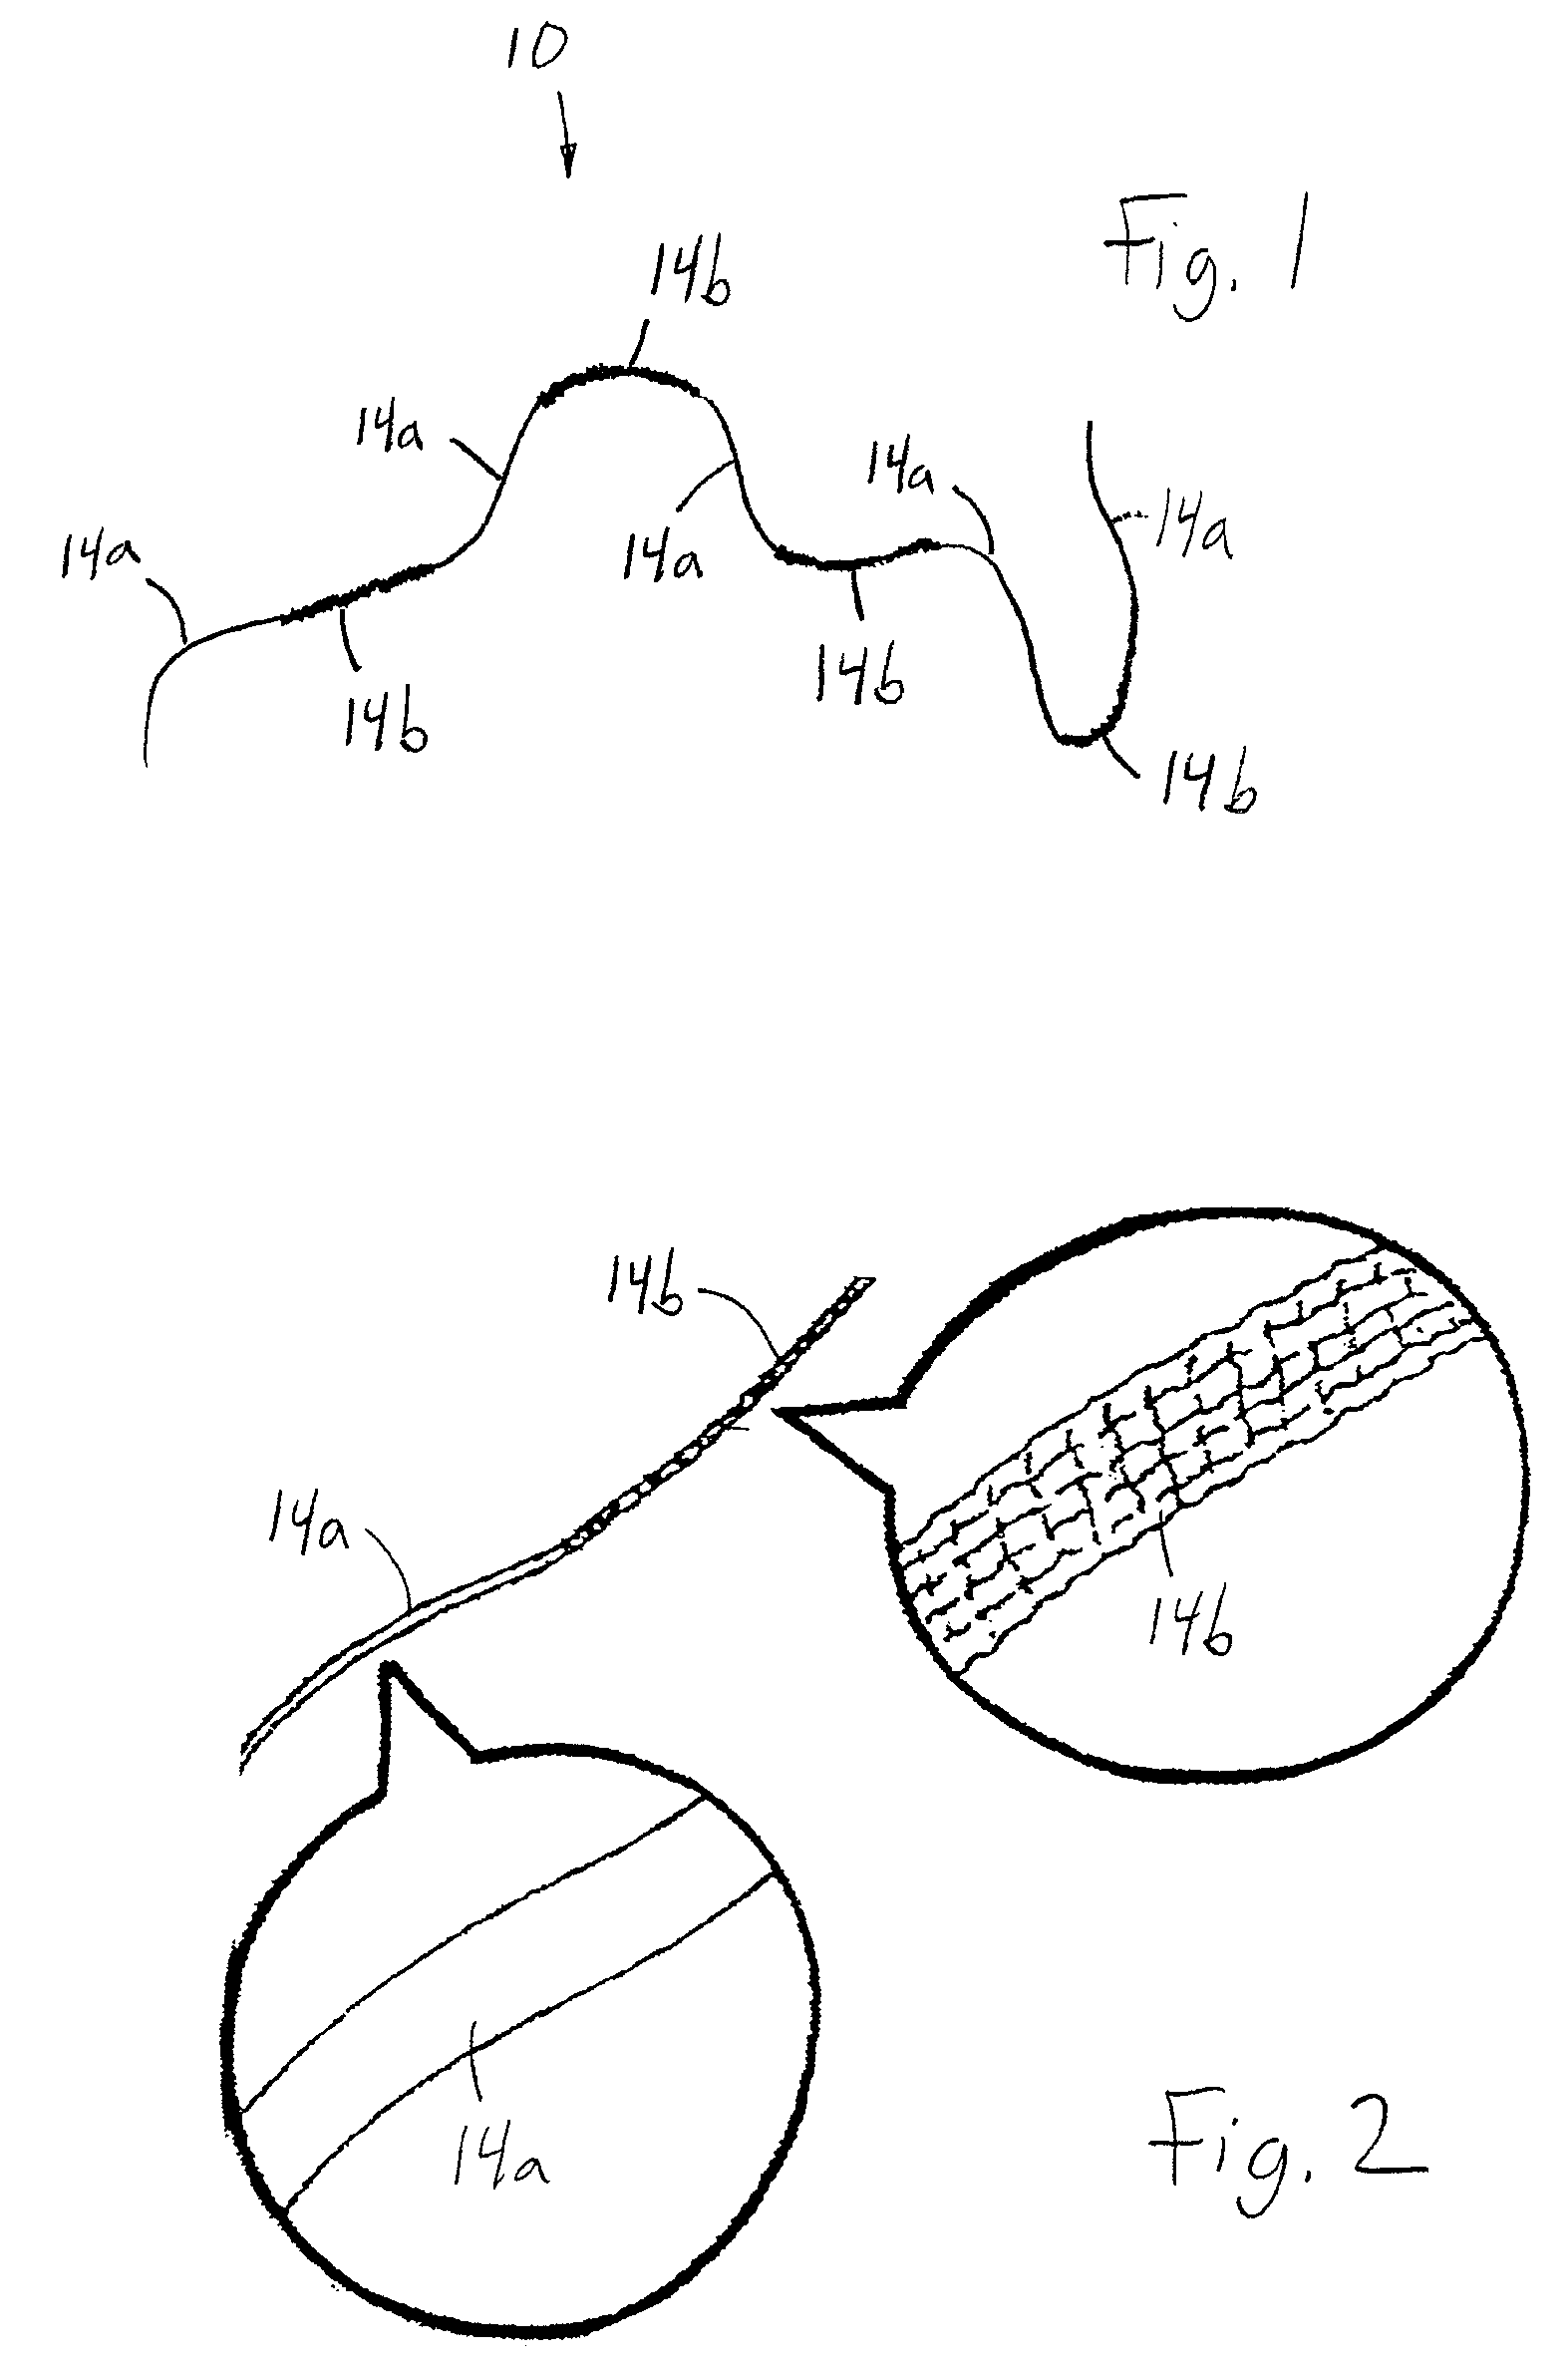 Multi-texture floss and methods of manufacturing multi-texture floss